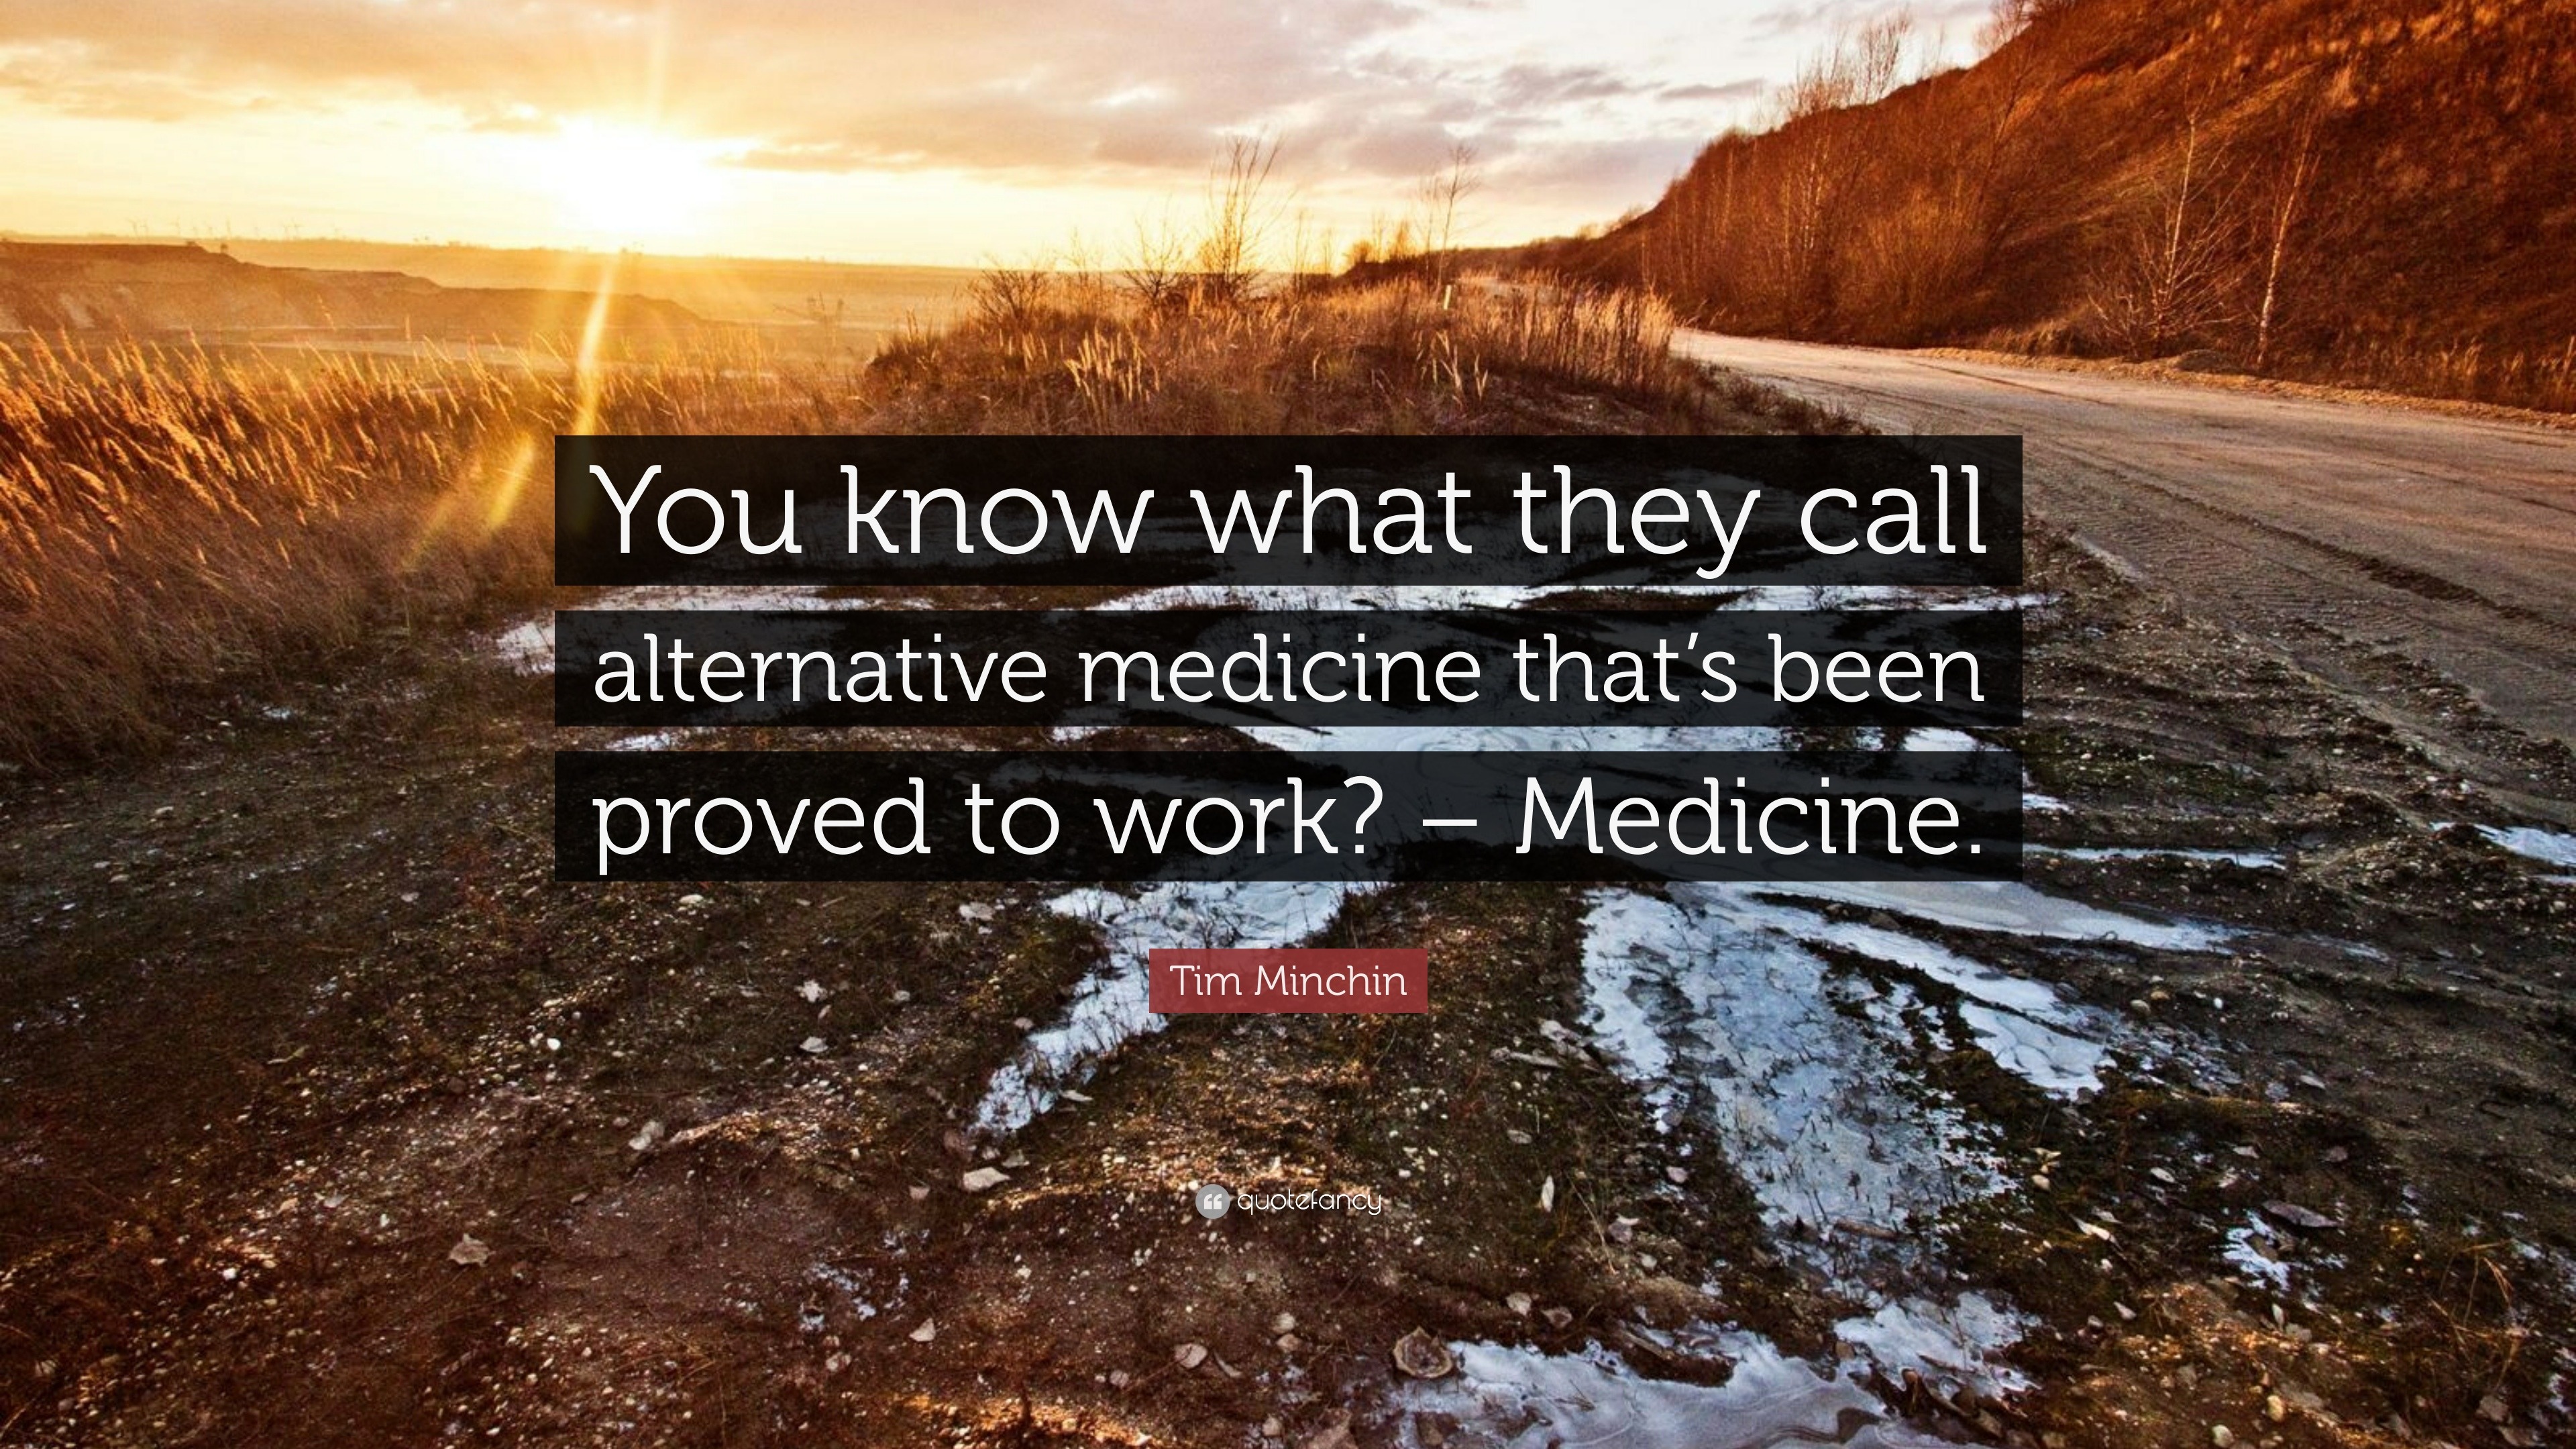 Tim Minchin “You know what they call alternative medicine that's been proved to work? –